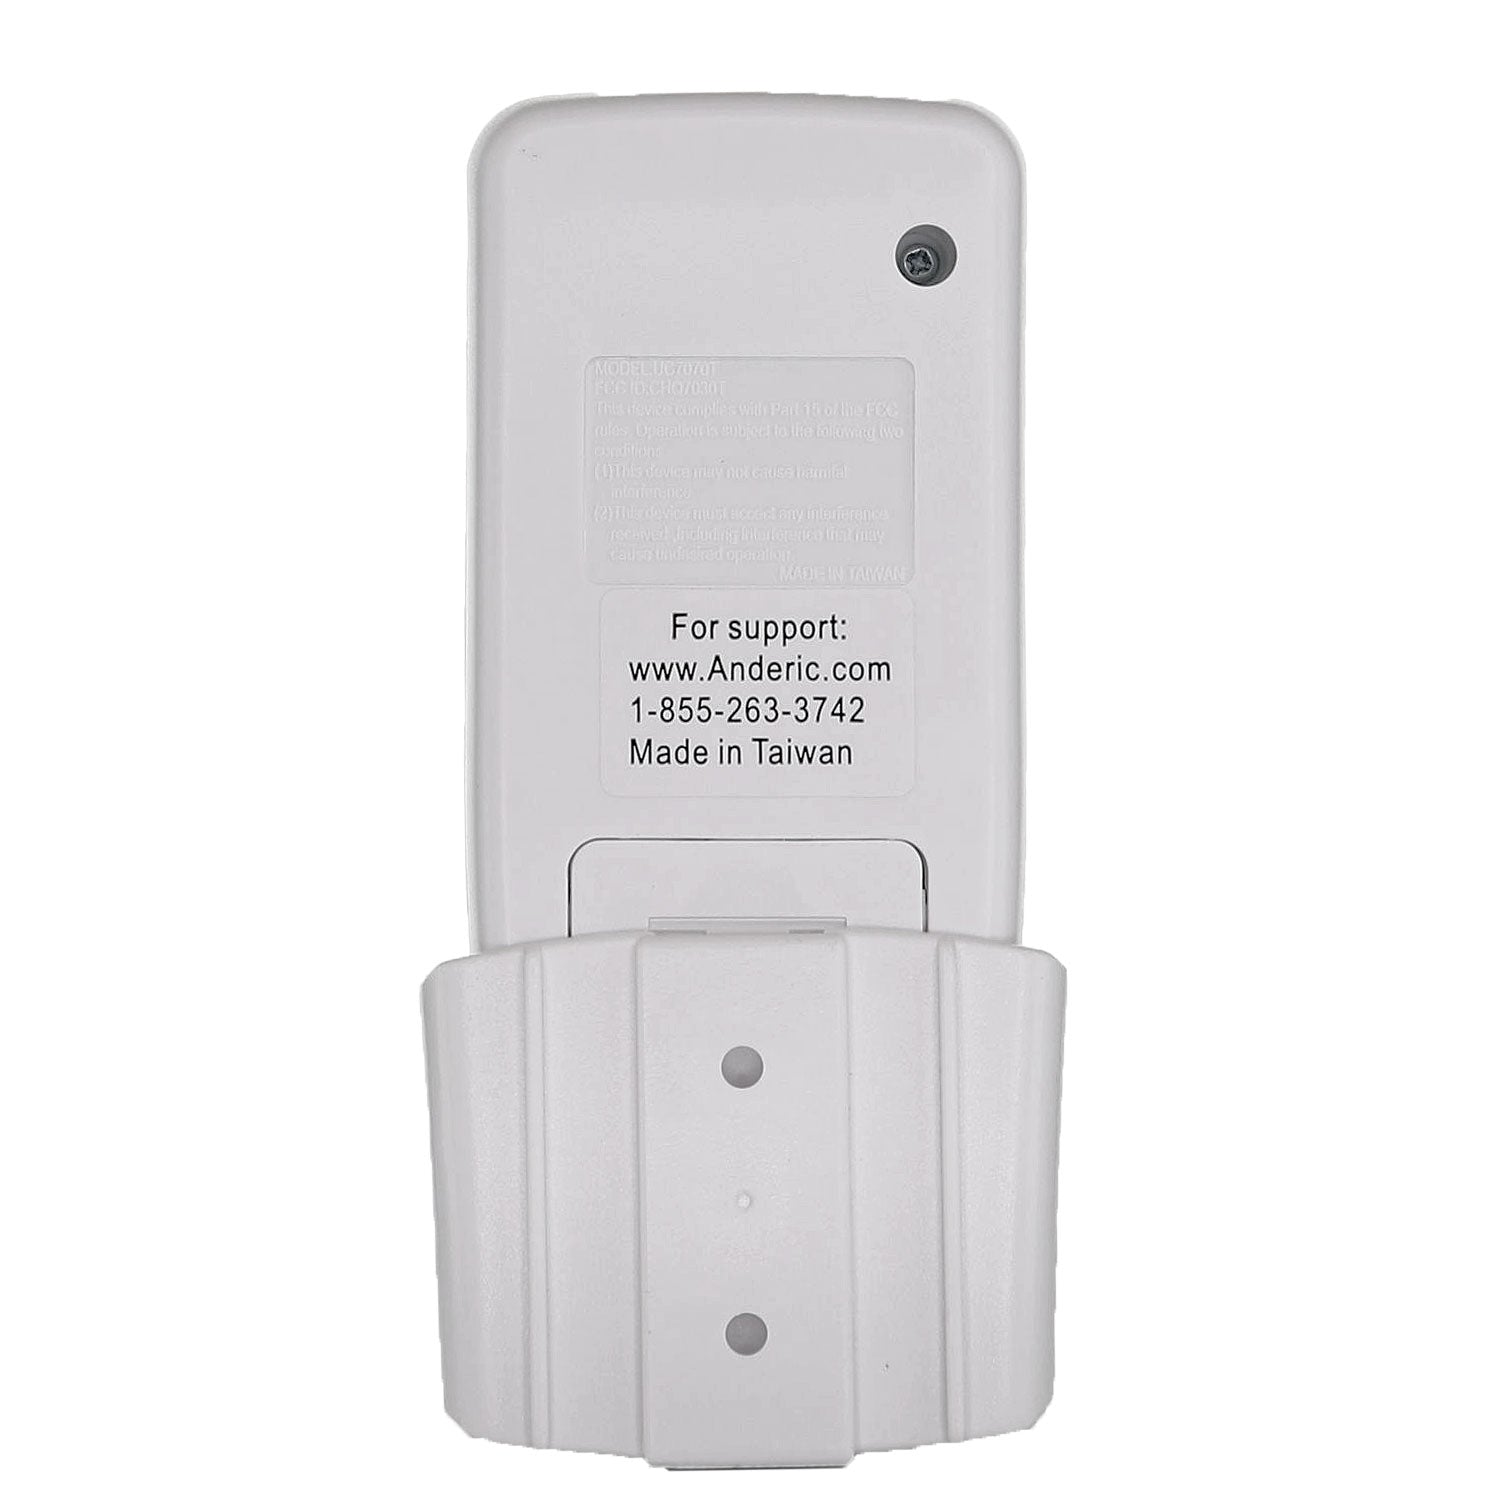 RR7070T (UC7070T) Remote Control for Harbor Breeze® and Others Ceiling Fans